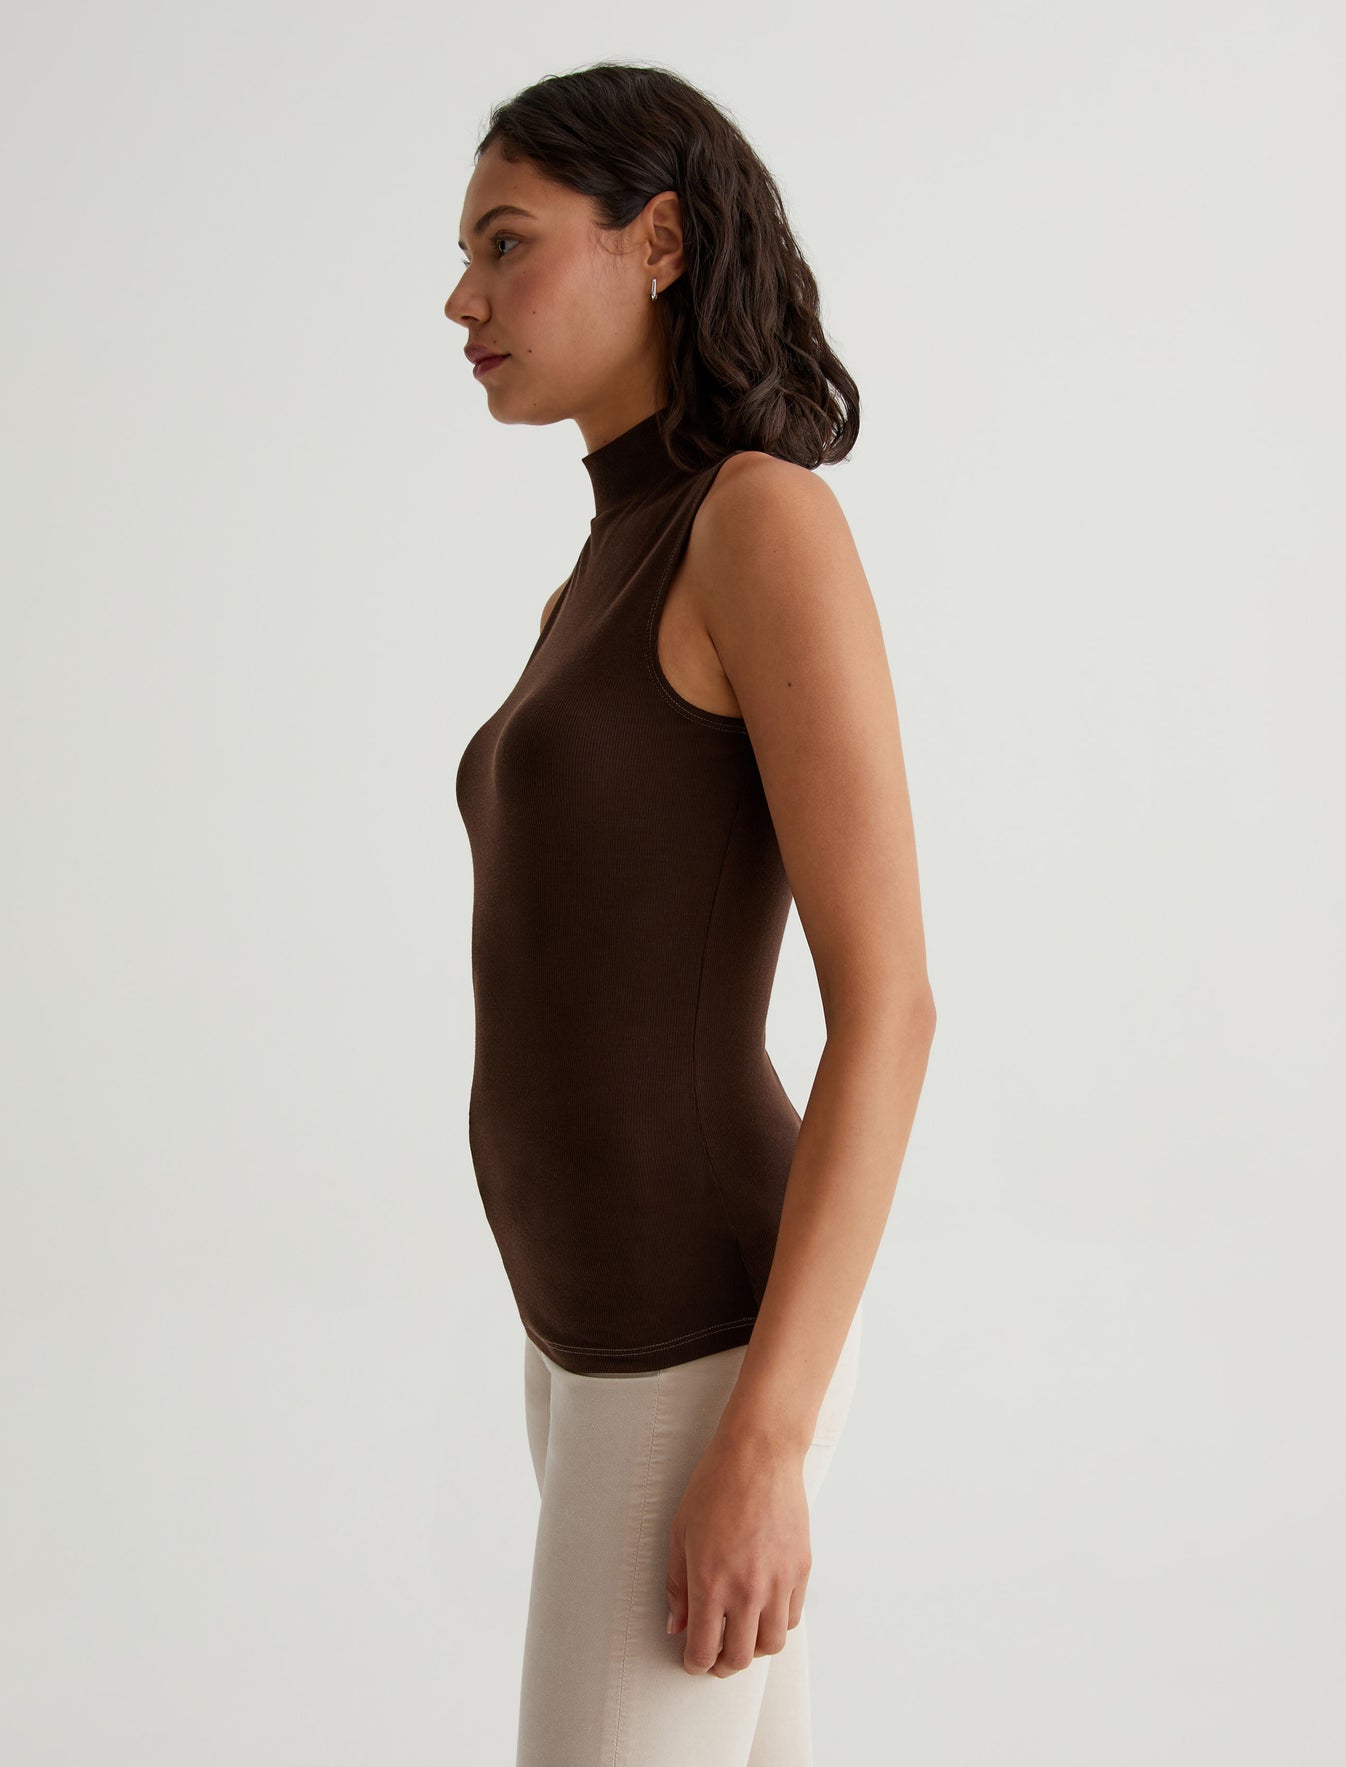 Official Bitter Edie Womens Sleeveless at Jeans Turtleneck AG Chocolate Store